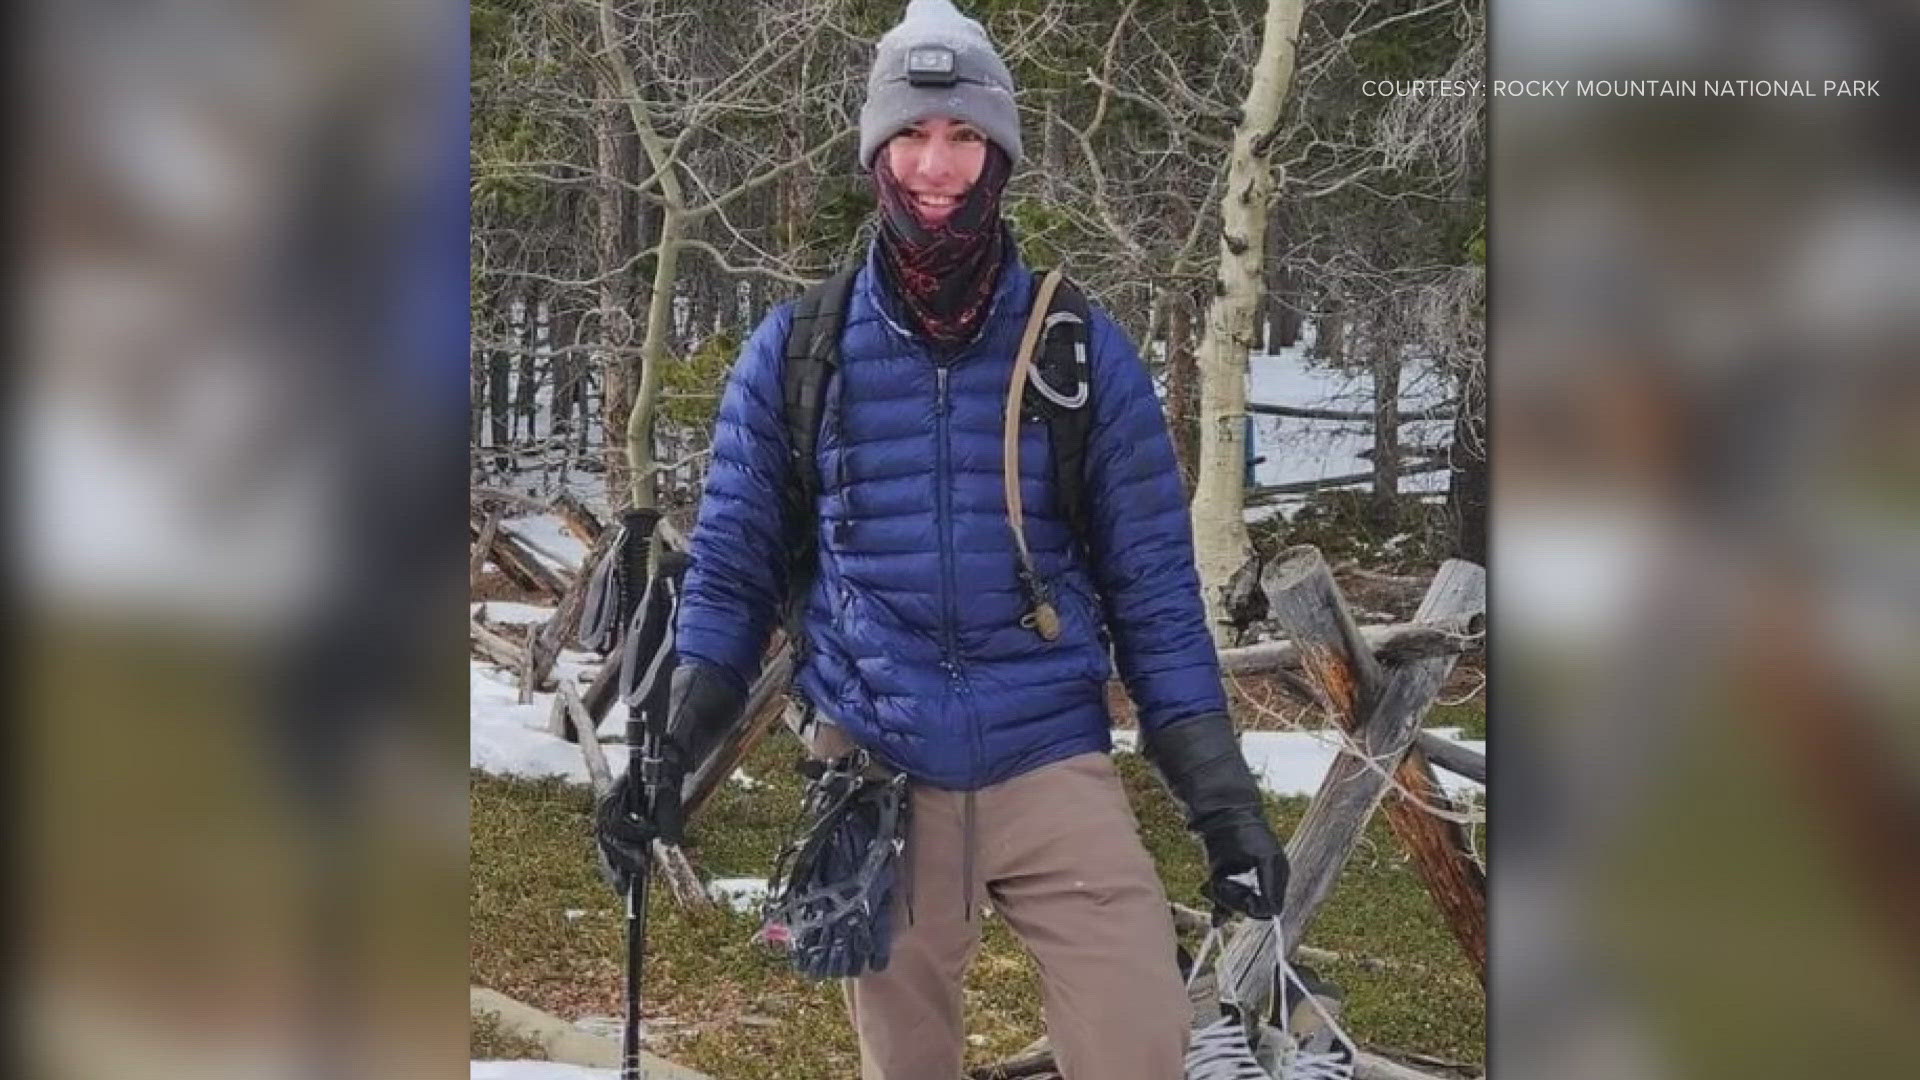 The body of Lucas Macaj, 23, was recovered by searchers on Longs Peak. A spokesperson for RMNP said he took a "significant fall."